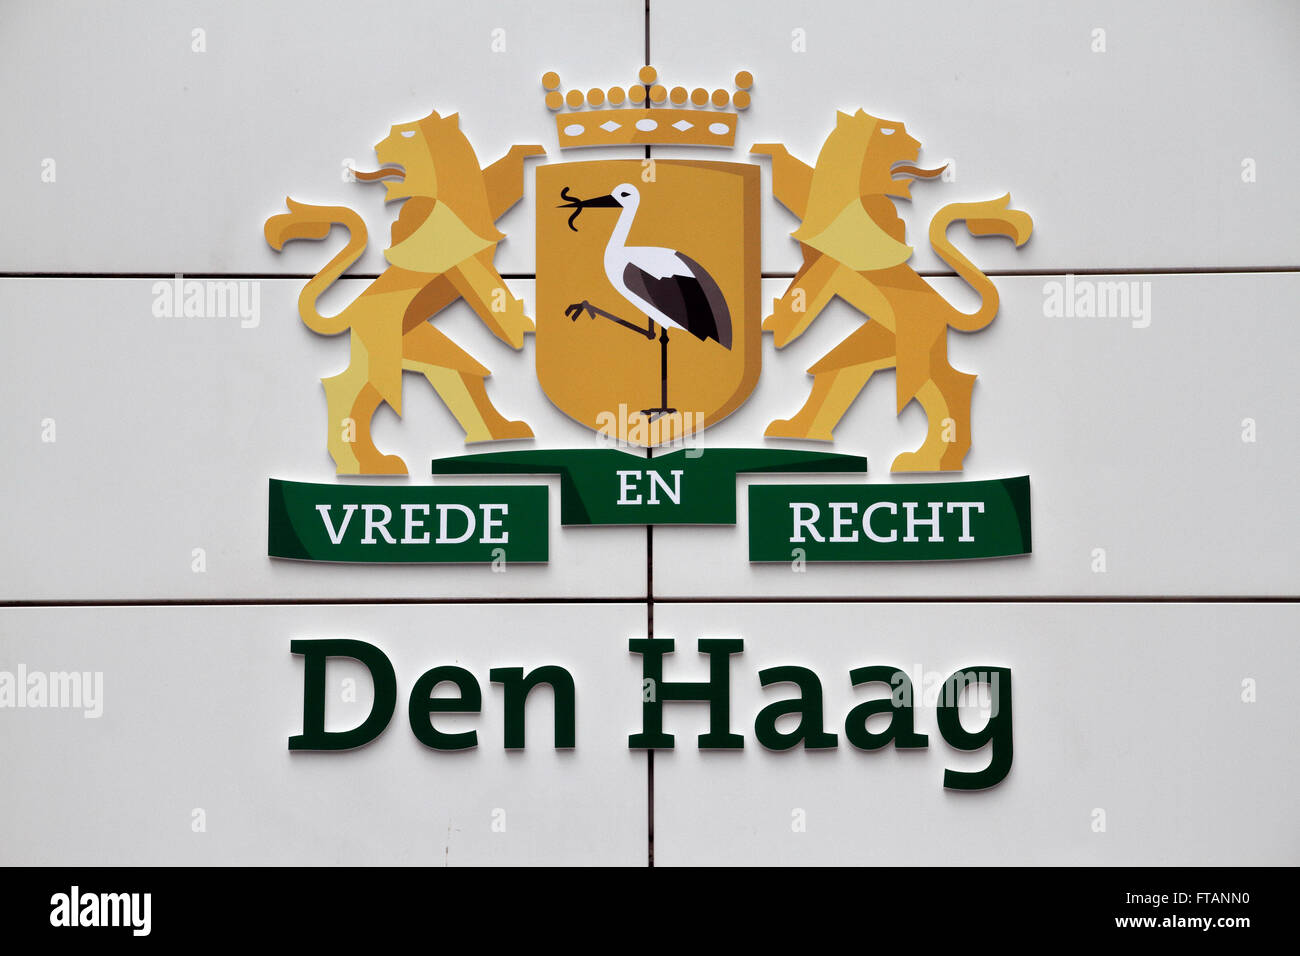 The logo and slogan for the Hague, 'Vrede En Recht Den Haag' in The Hague, Netherlands. Stock Photo